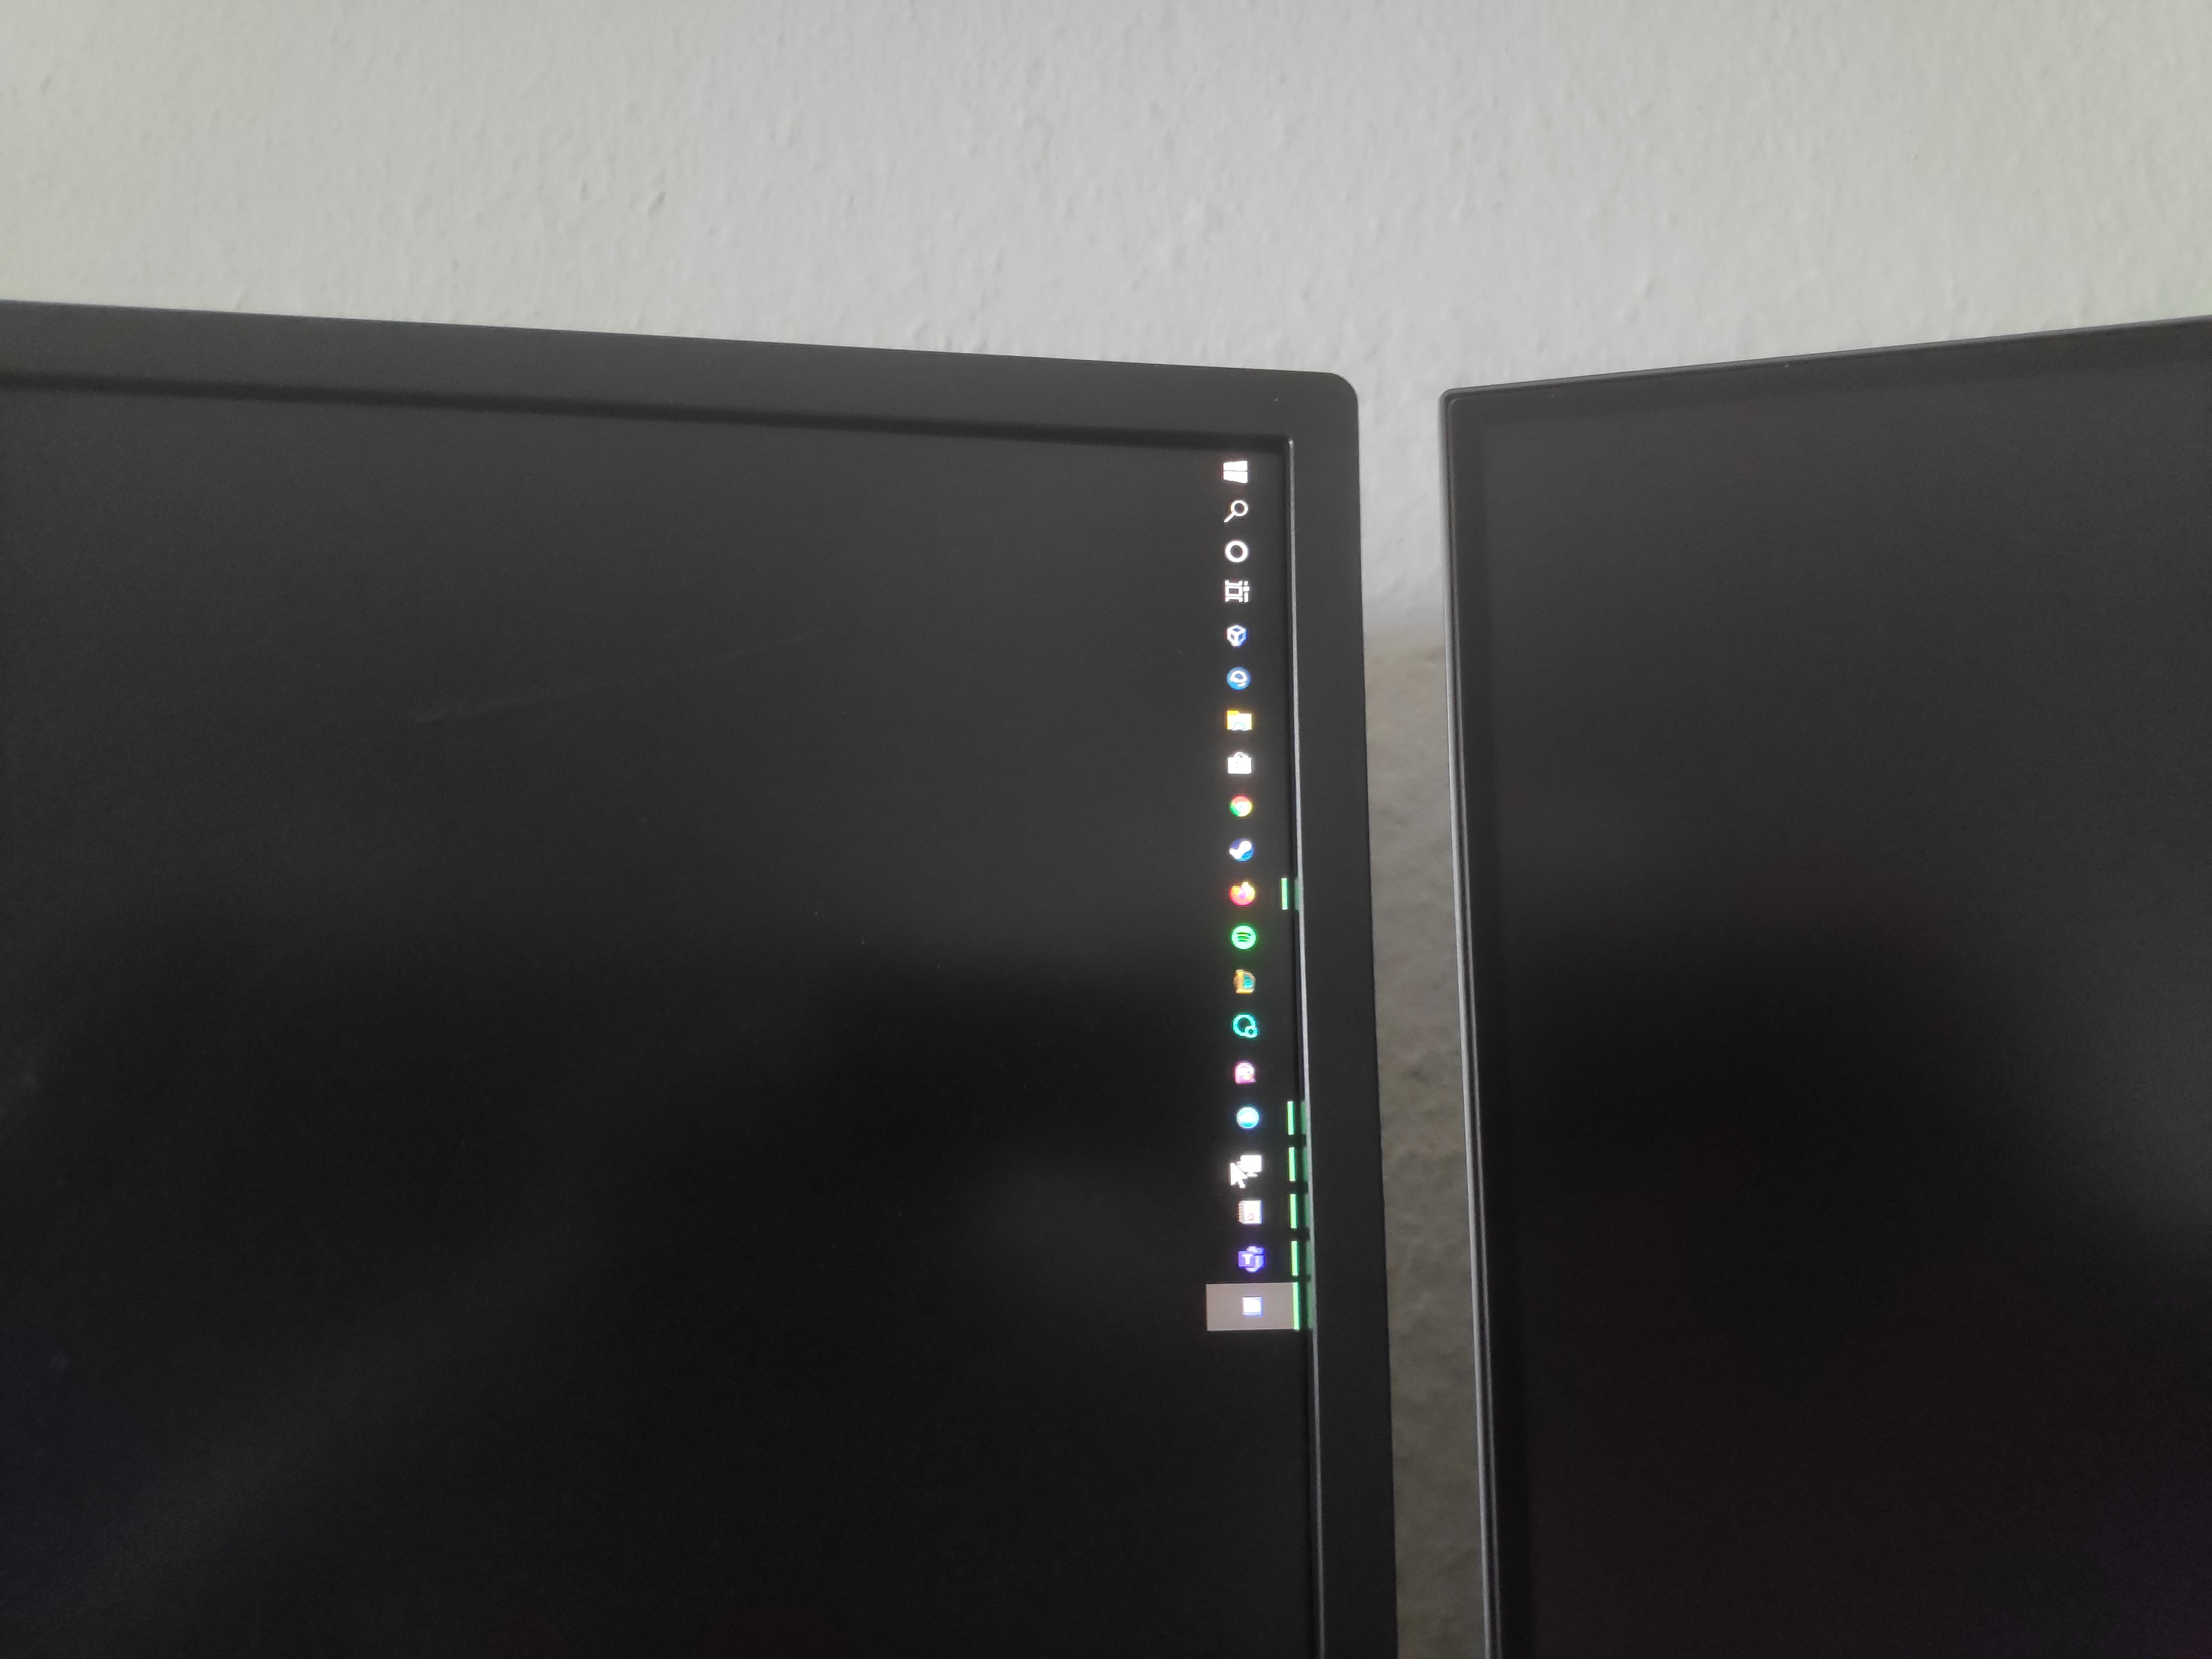 Win10, mostly black screen, no periphal input